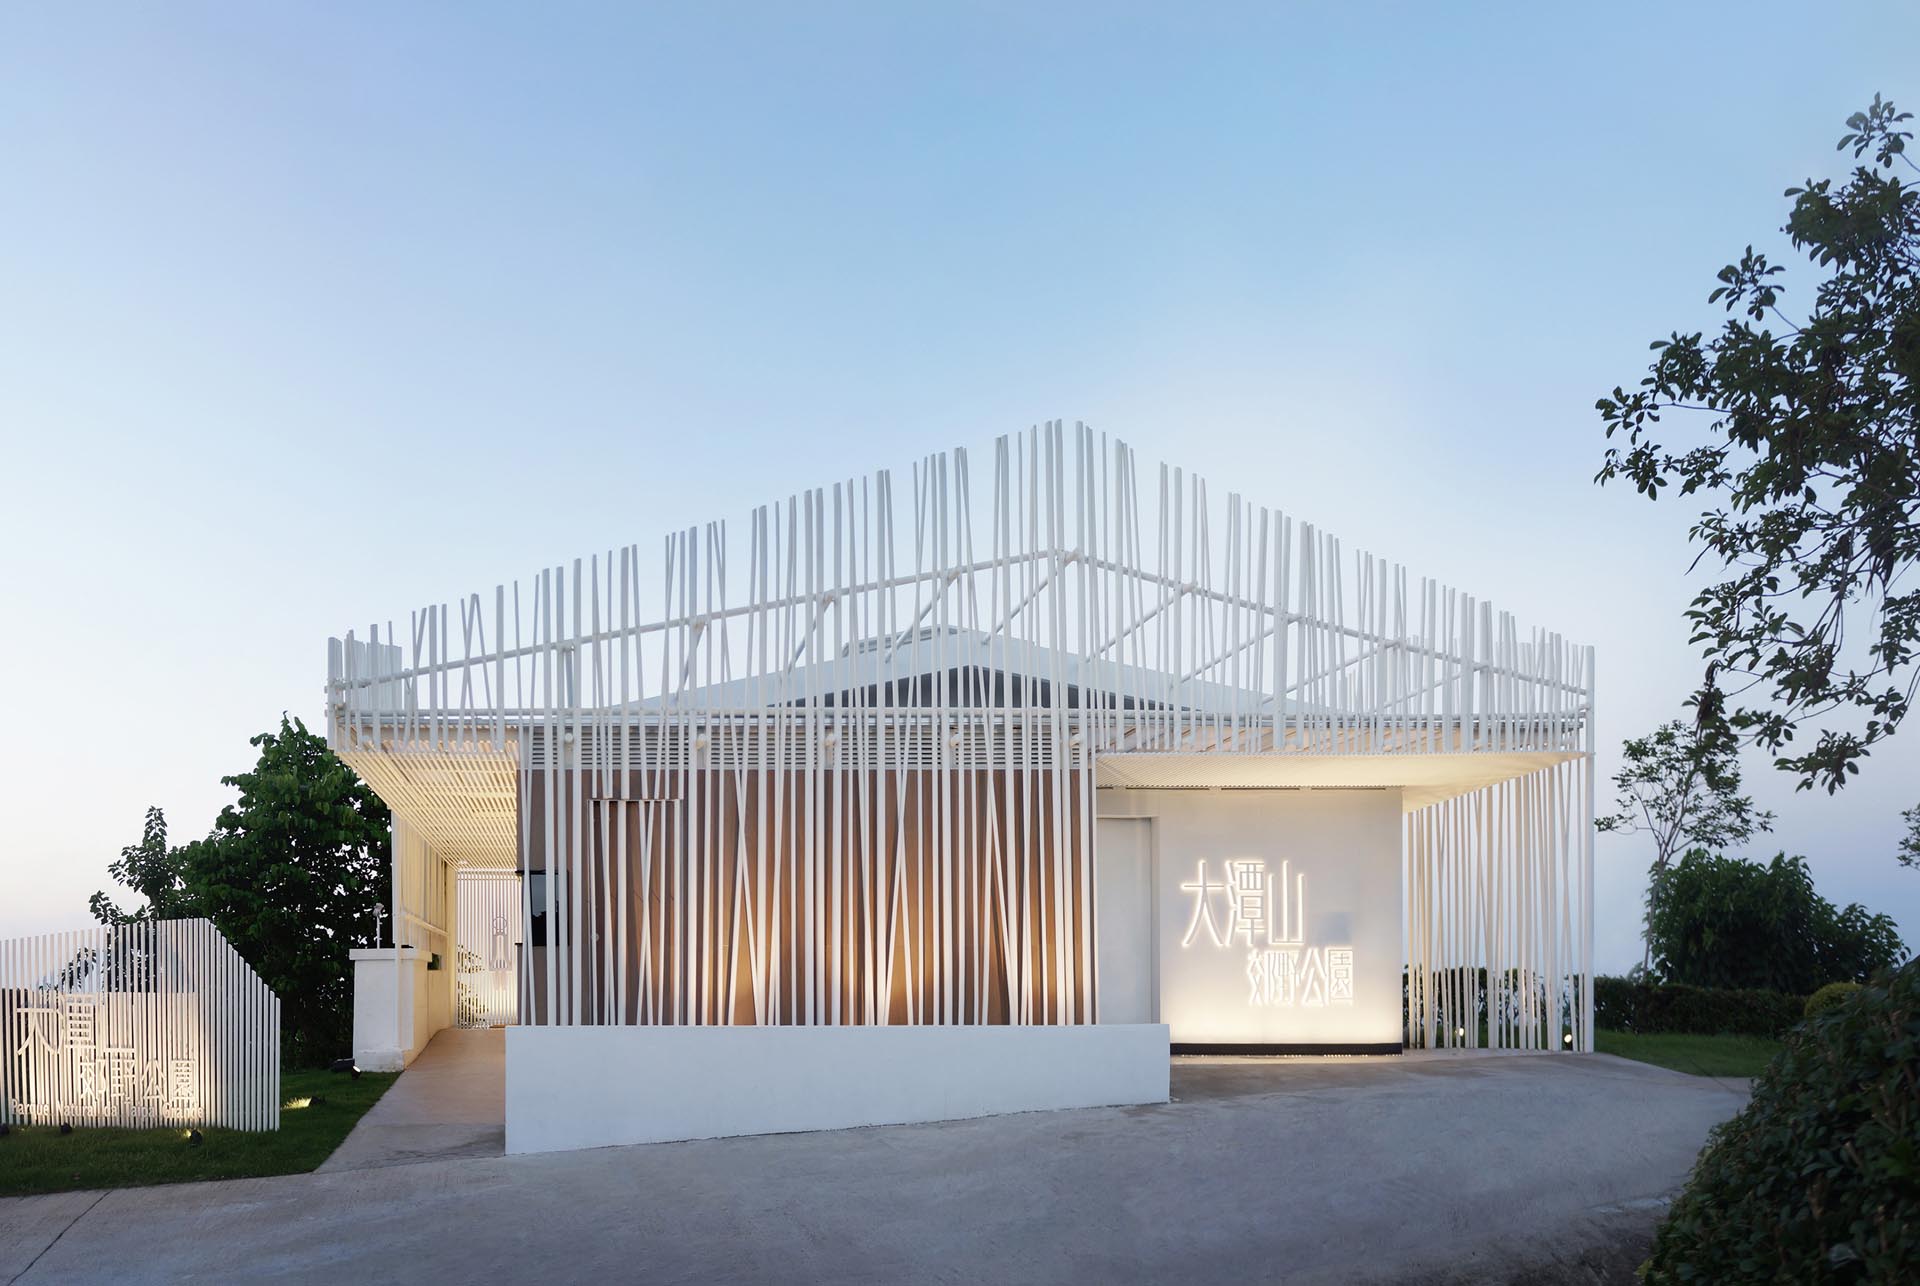 The facade of the Bamboo Pavilion is a re-interpretation of bamboo scaffolding, with hundreds of white aluminum tubes arranged in a staggered manner, surrounding the renovated structure forming a translucent shell that blends in with nature.